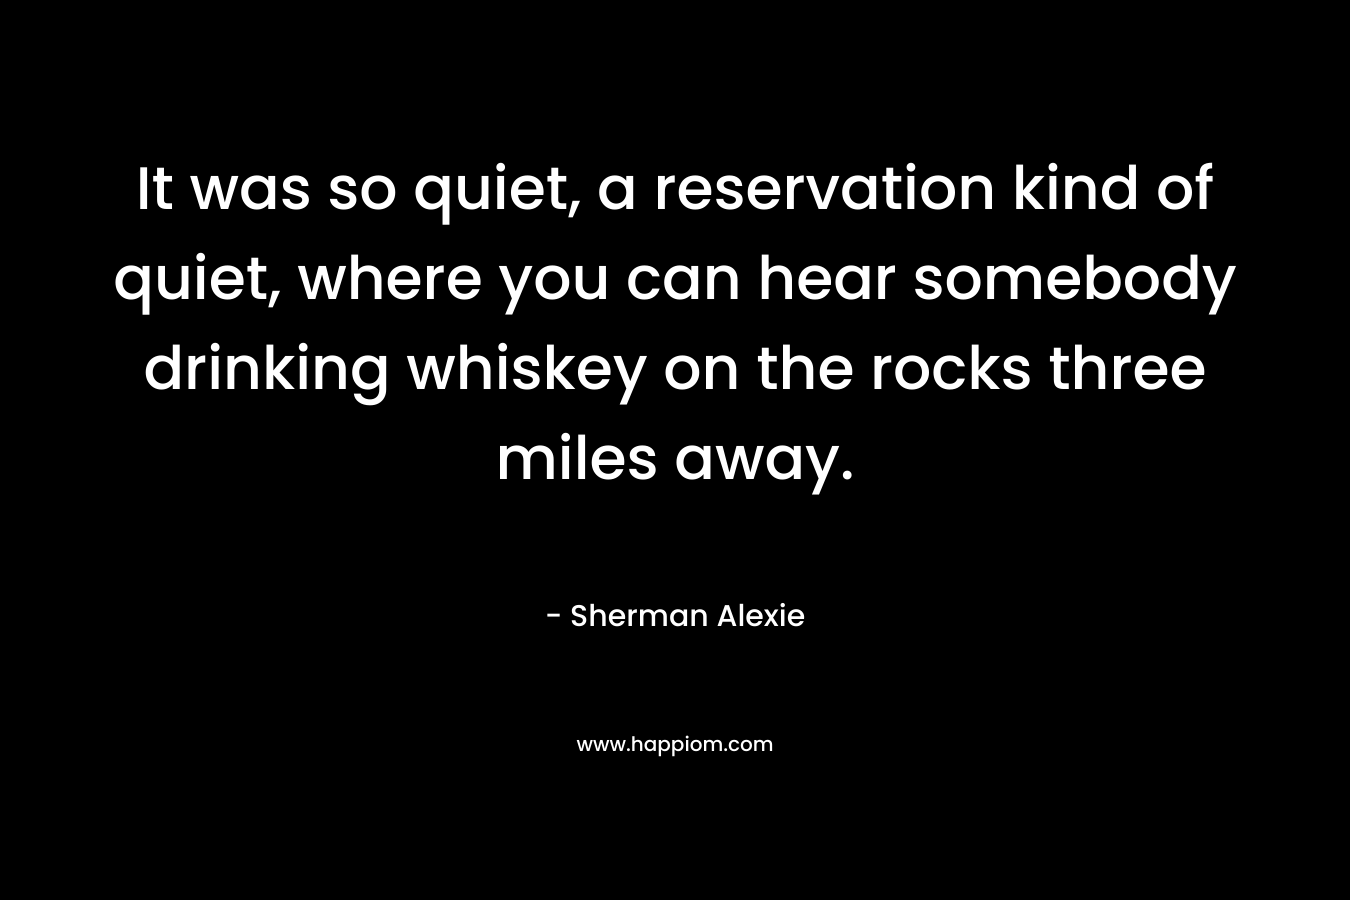 It was so quiet, a reservation kind of quiet, where you can hear somebody drinking whiskey on the rocks three miles away.